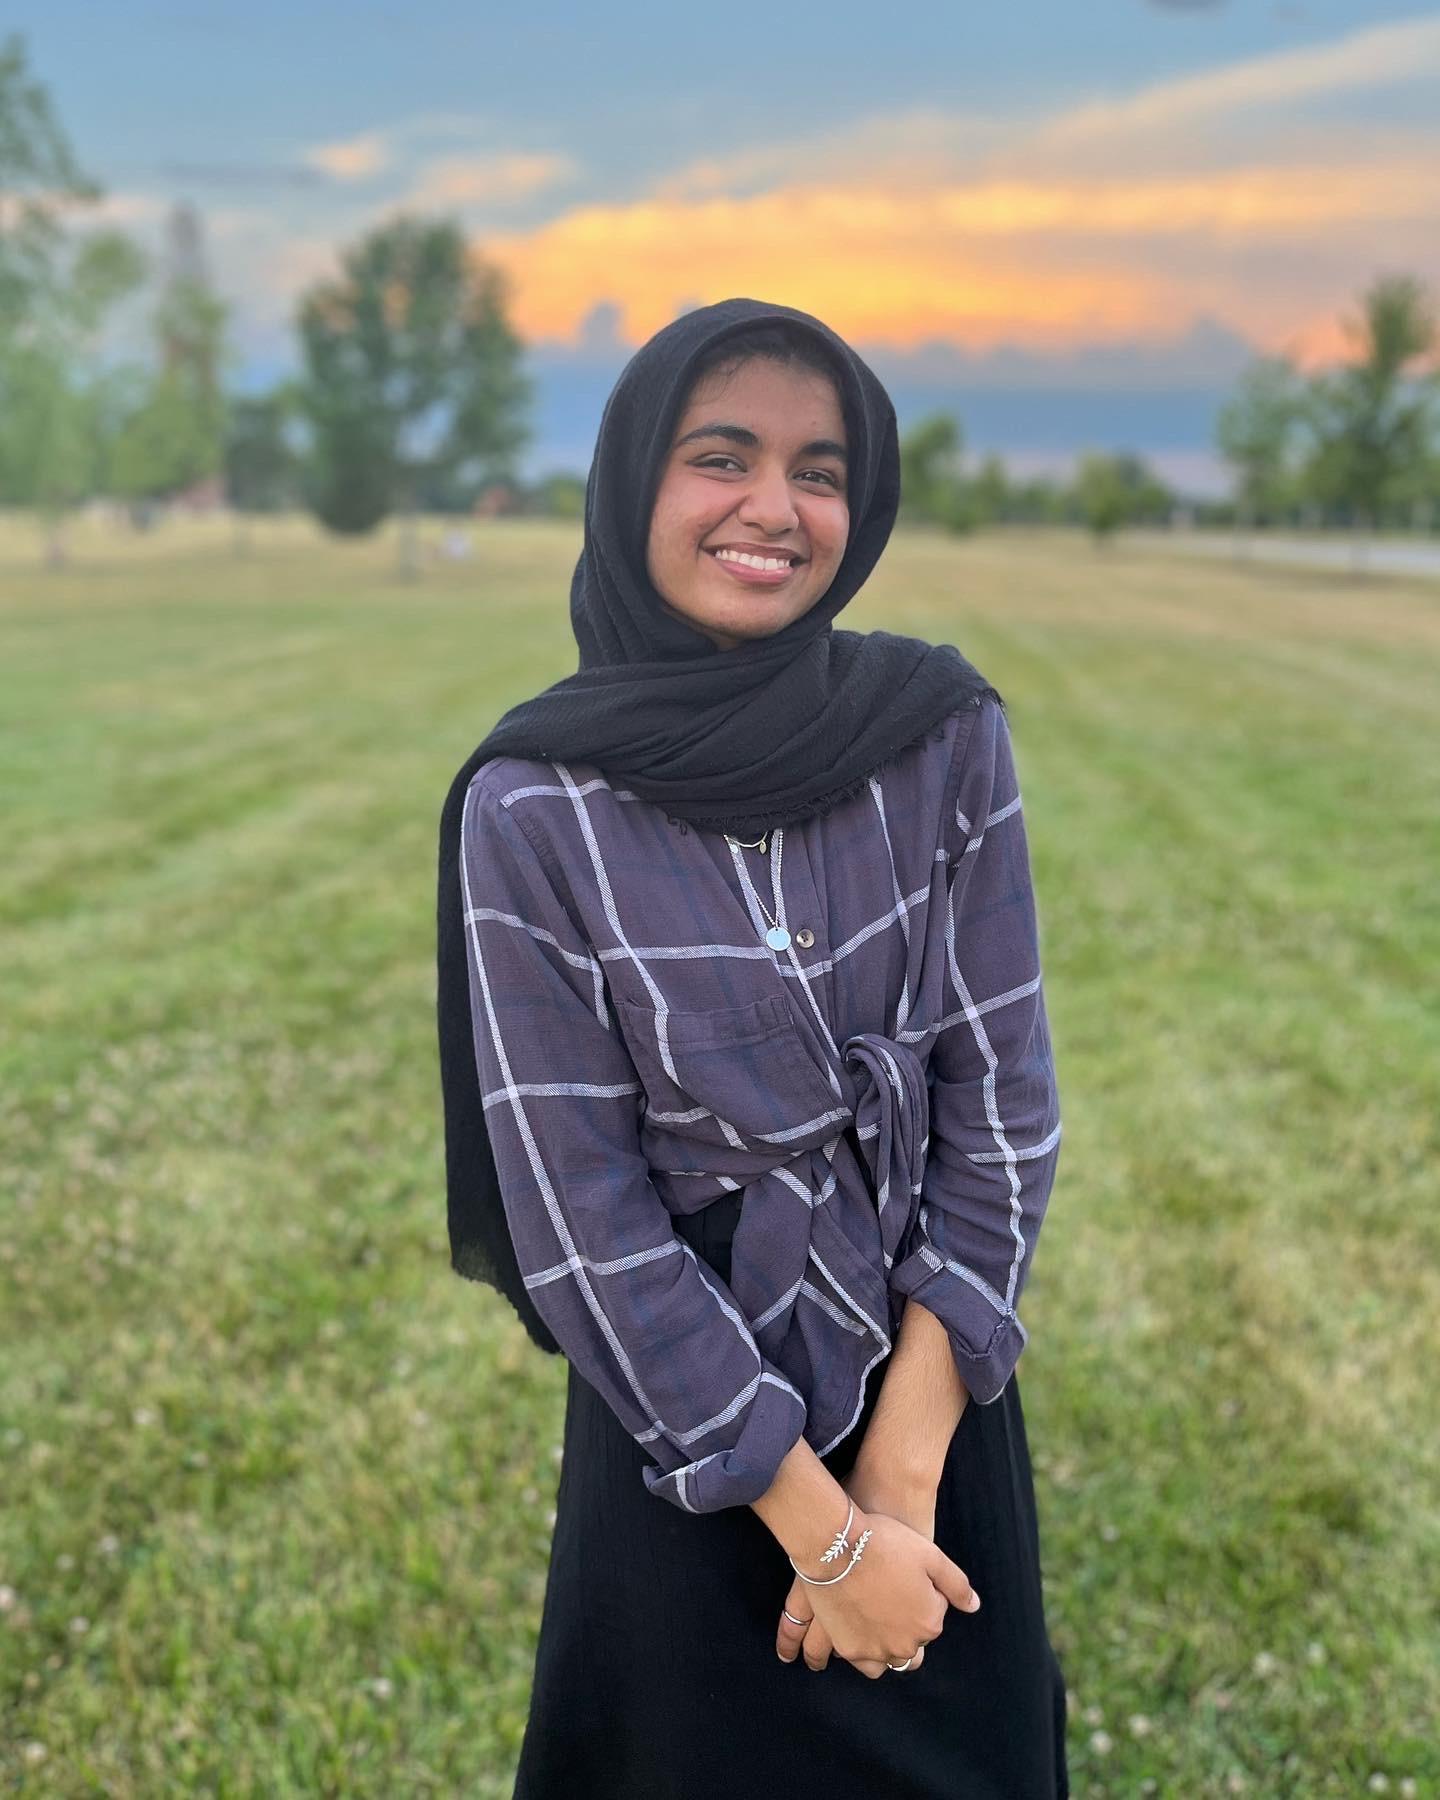 A female student stands outside in a field smiling